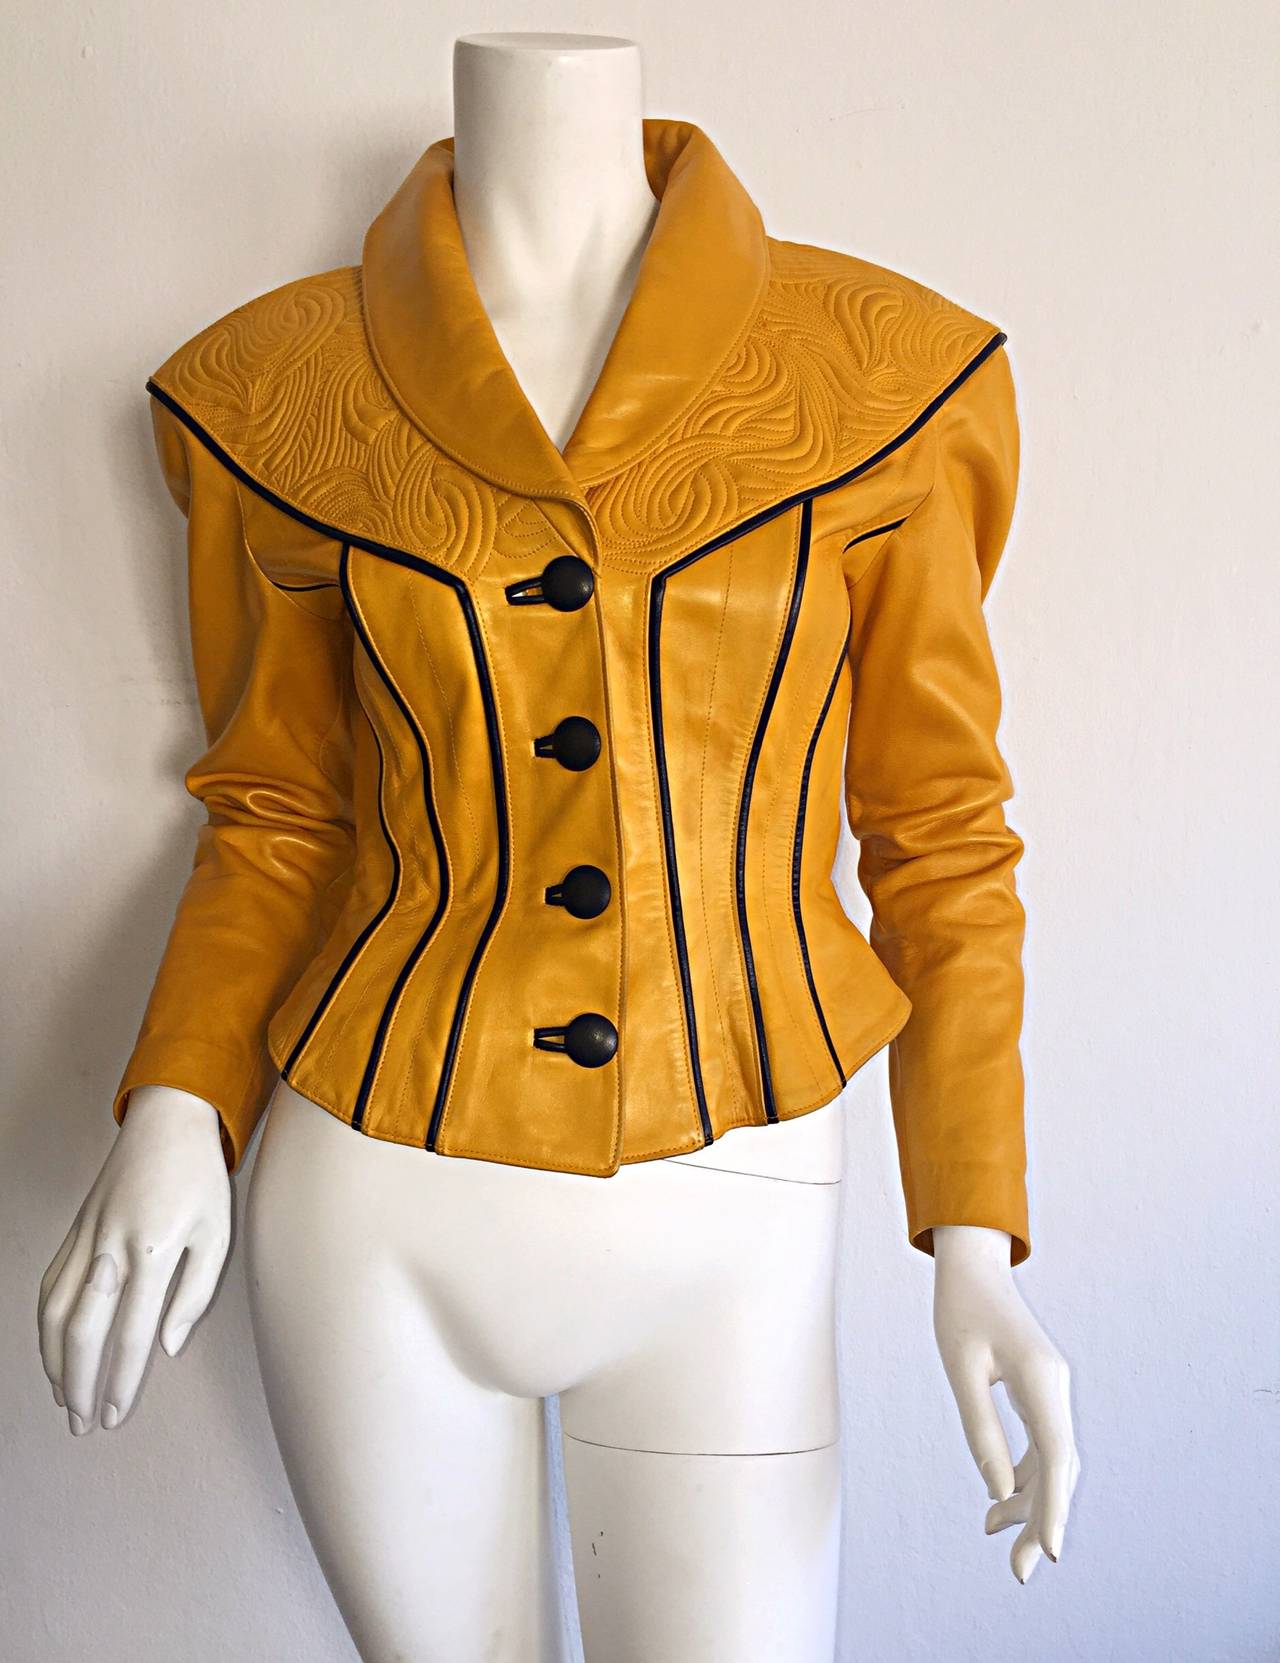 Rare Vintage Jean Claude Jitrois Mustard Yellow Butter Soft Leather Jacket 2